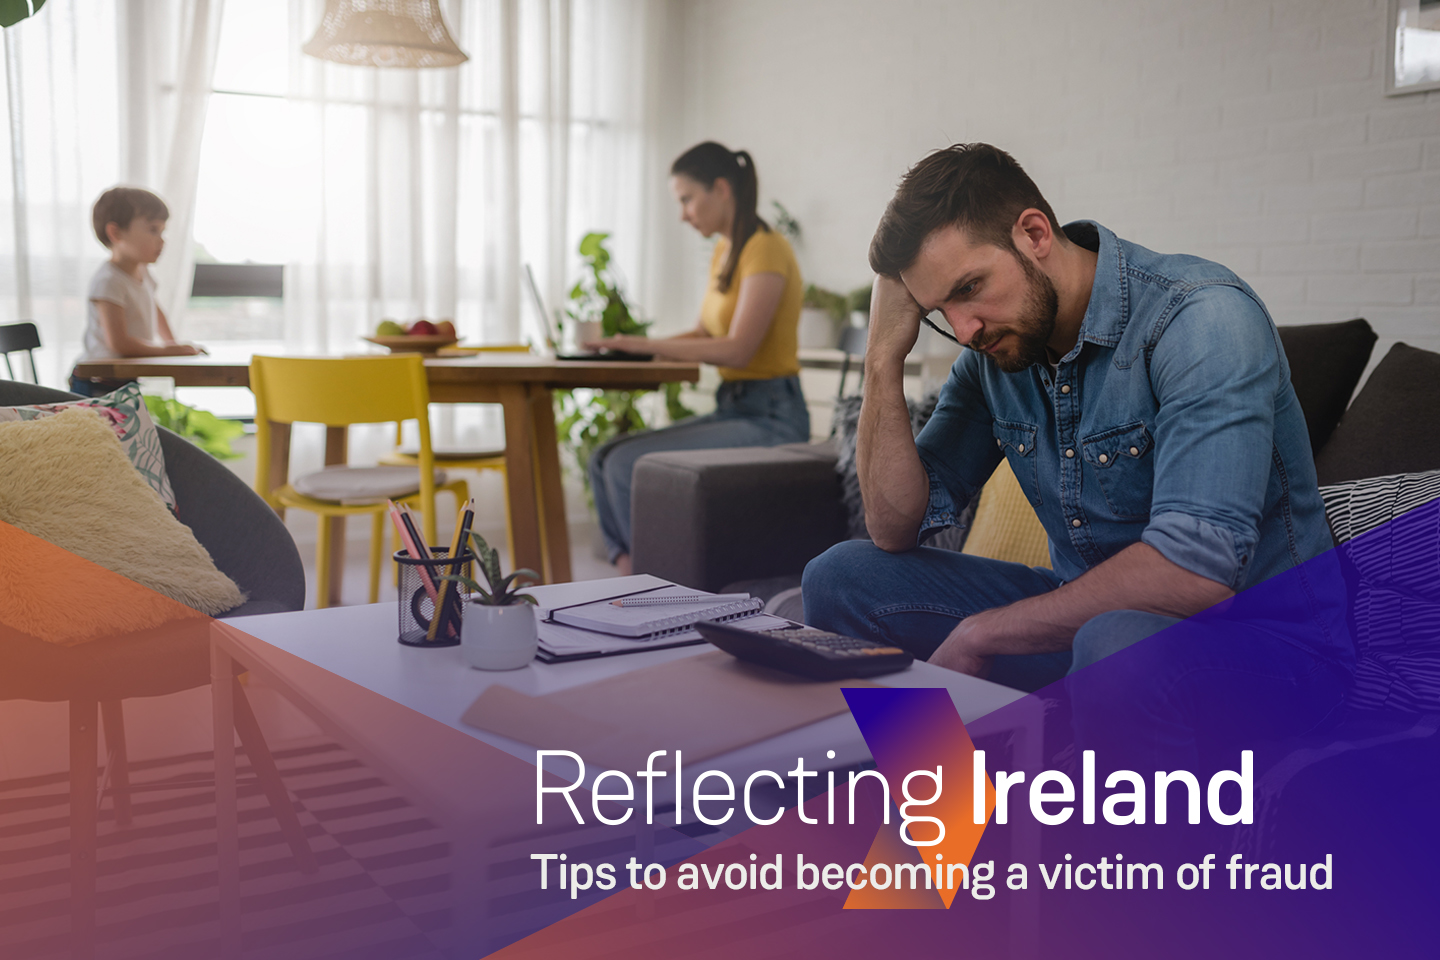 Reflecting Ireland: Tips to avoid becoming a victim of financial fraud